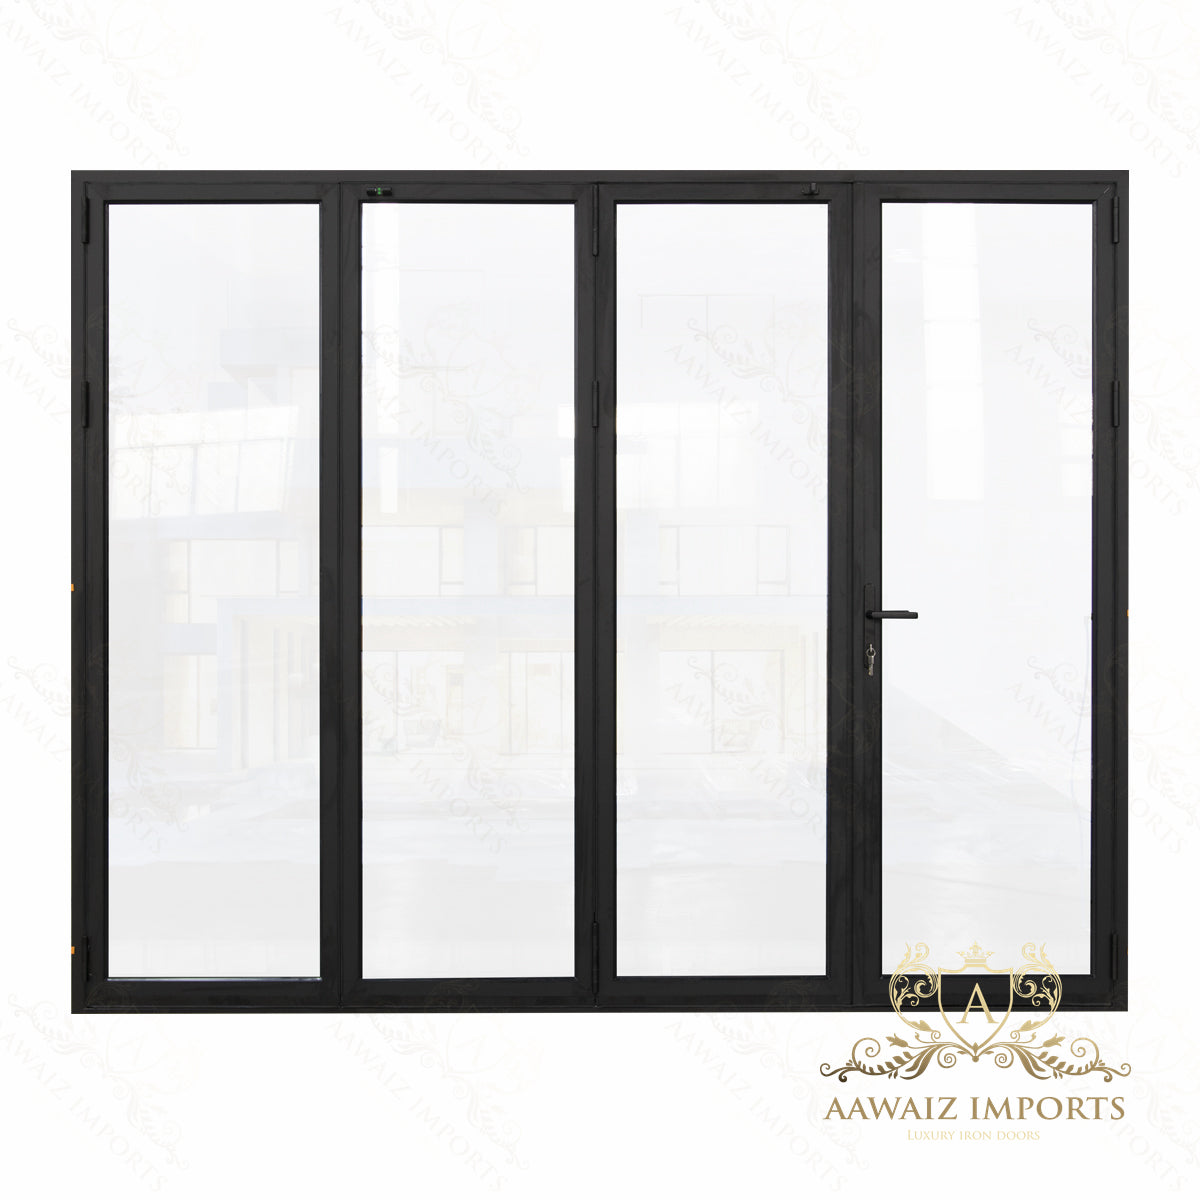 10 Ft Wide By 9 Ft Tall (120" By 108") Aluminum Bi Fold Patio Door Outswing  Thermal Break Insulated Matt Black Finish